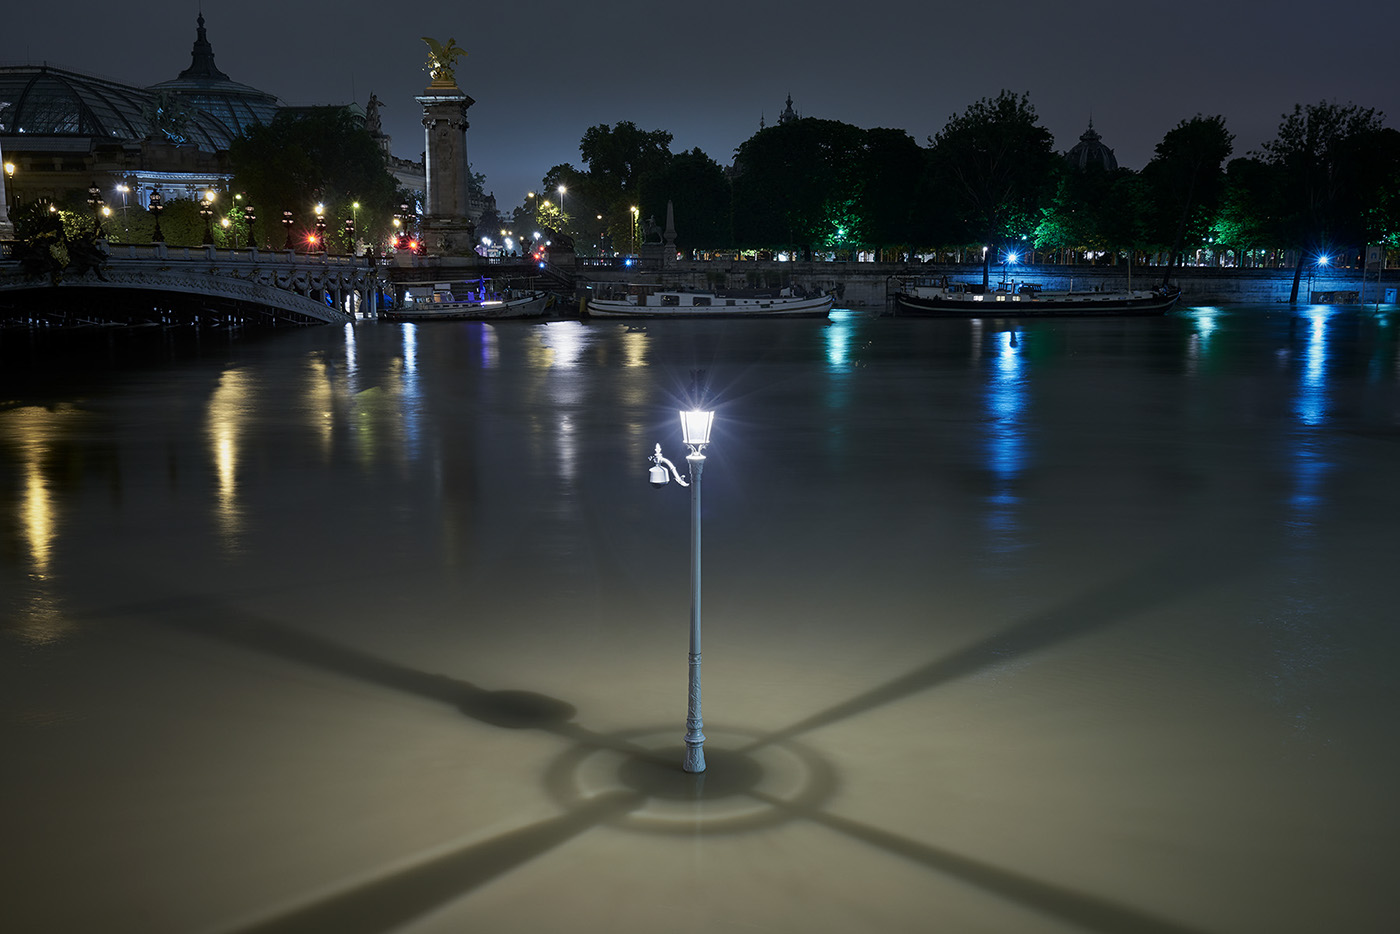 Paris seine river flood climate change climate disruption global warming monument daily life night